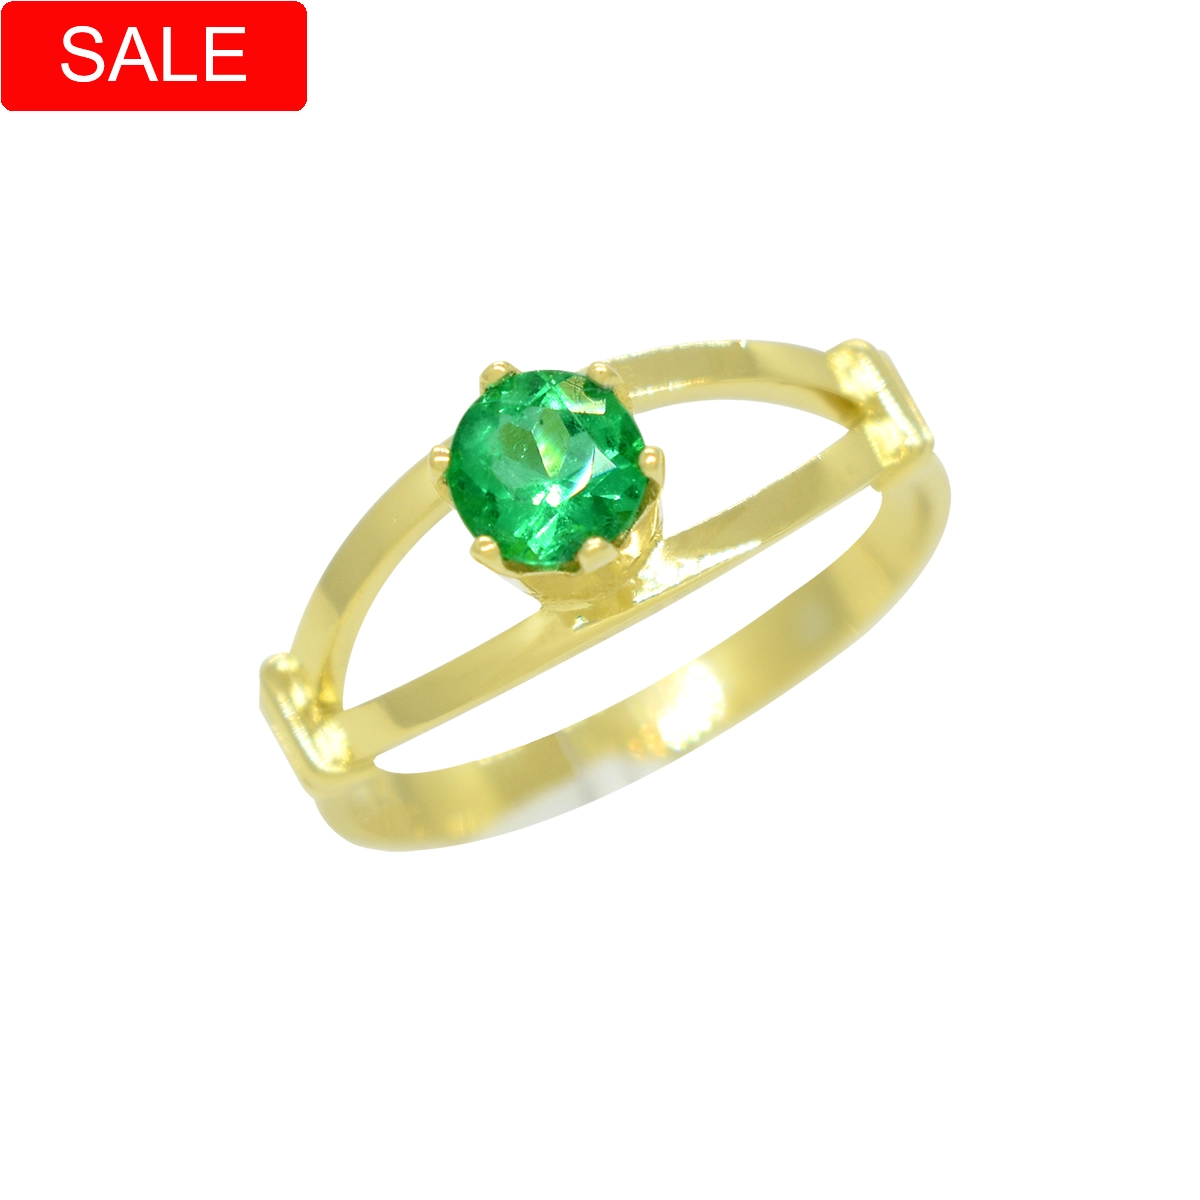 Solitaire Emerald Ring with Roud-Cut Emerald in Yellow Gold